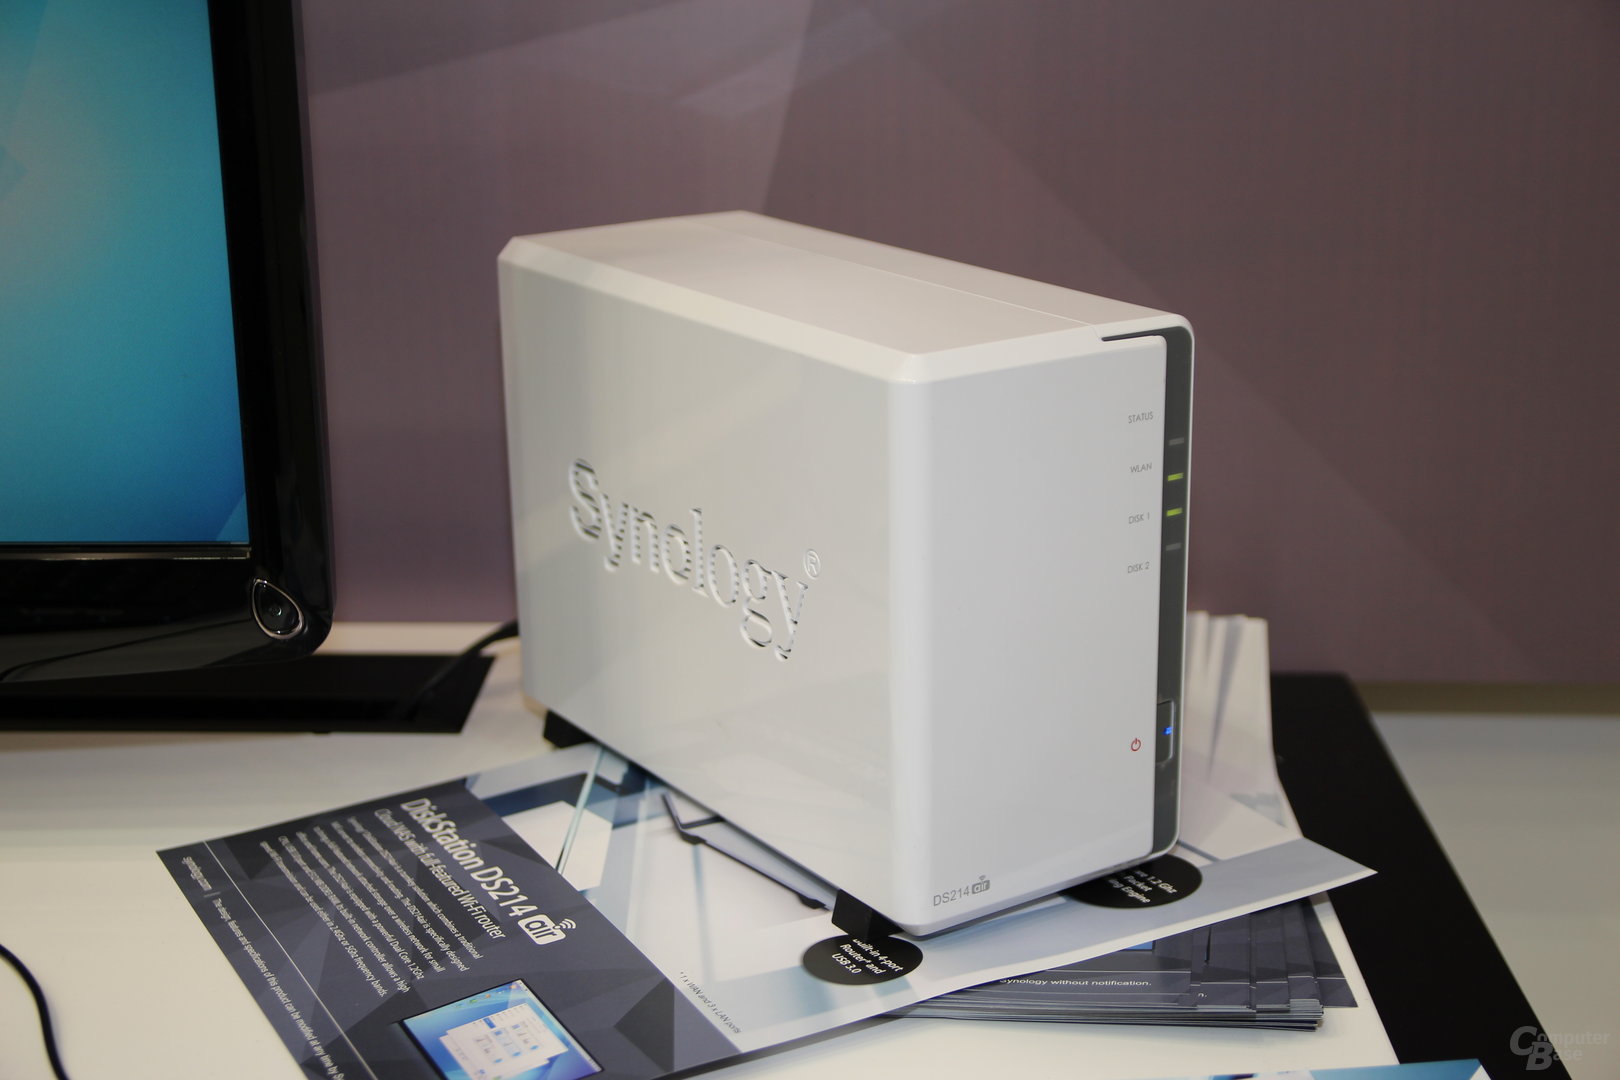 Synology DS214air